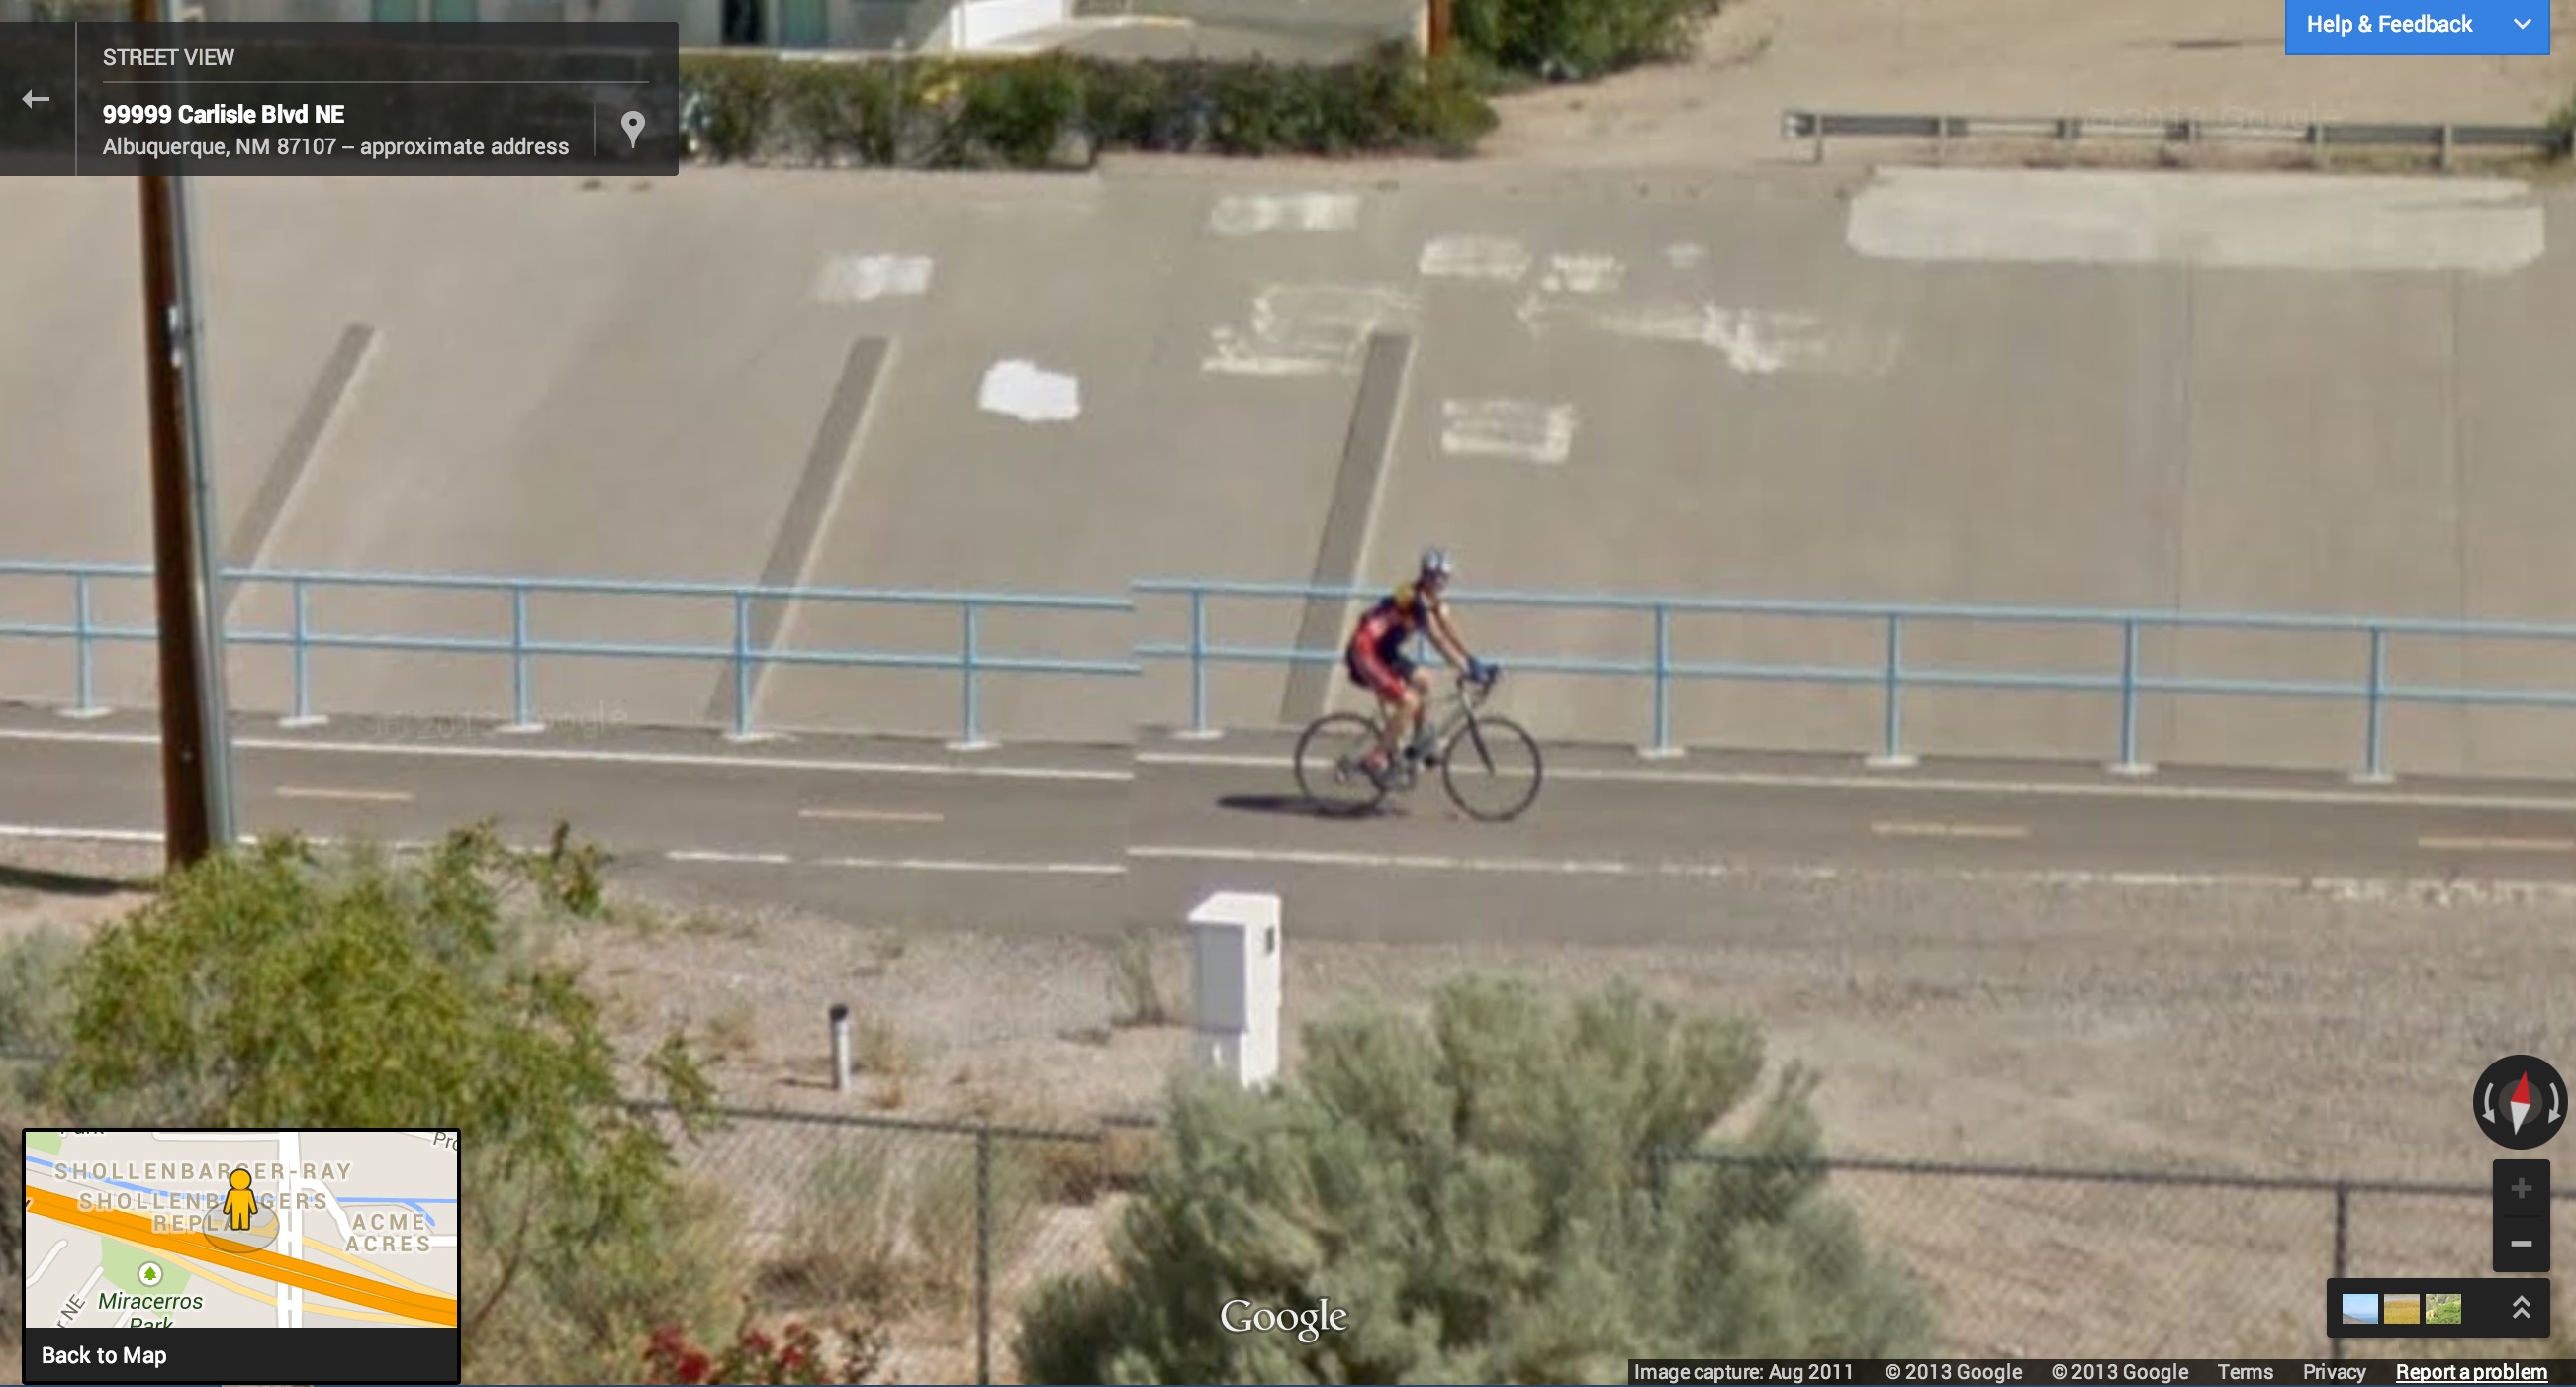 A Google Street View picture of me, riding my bike